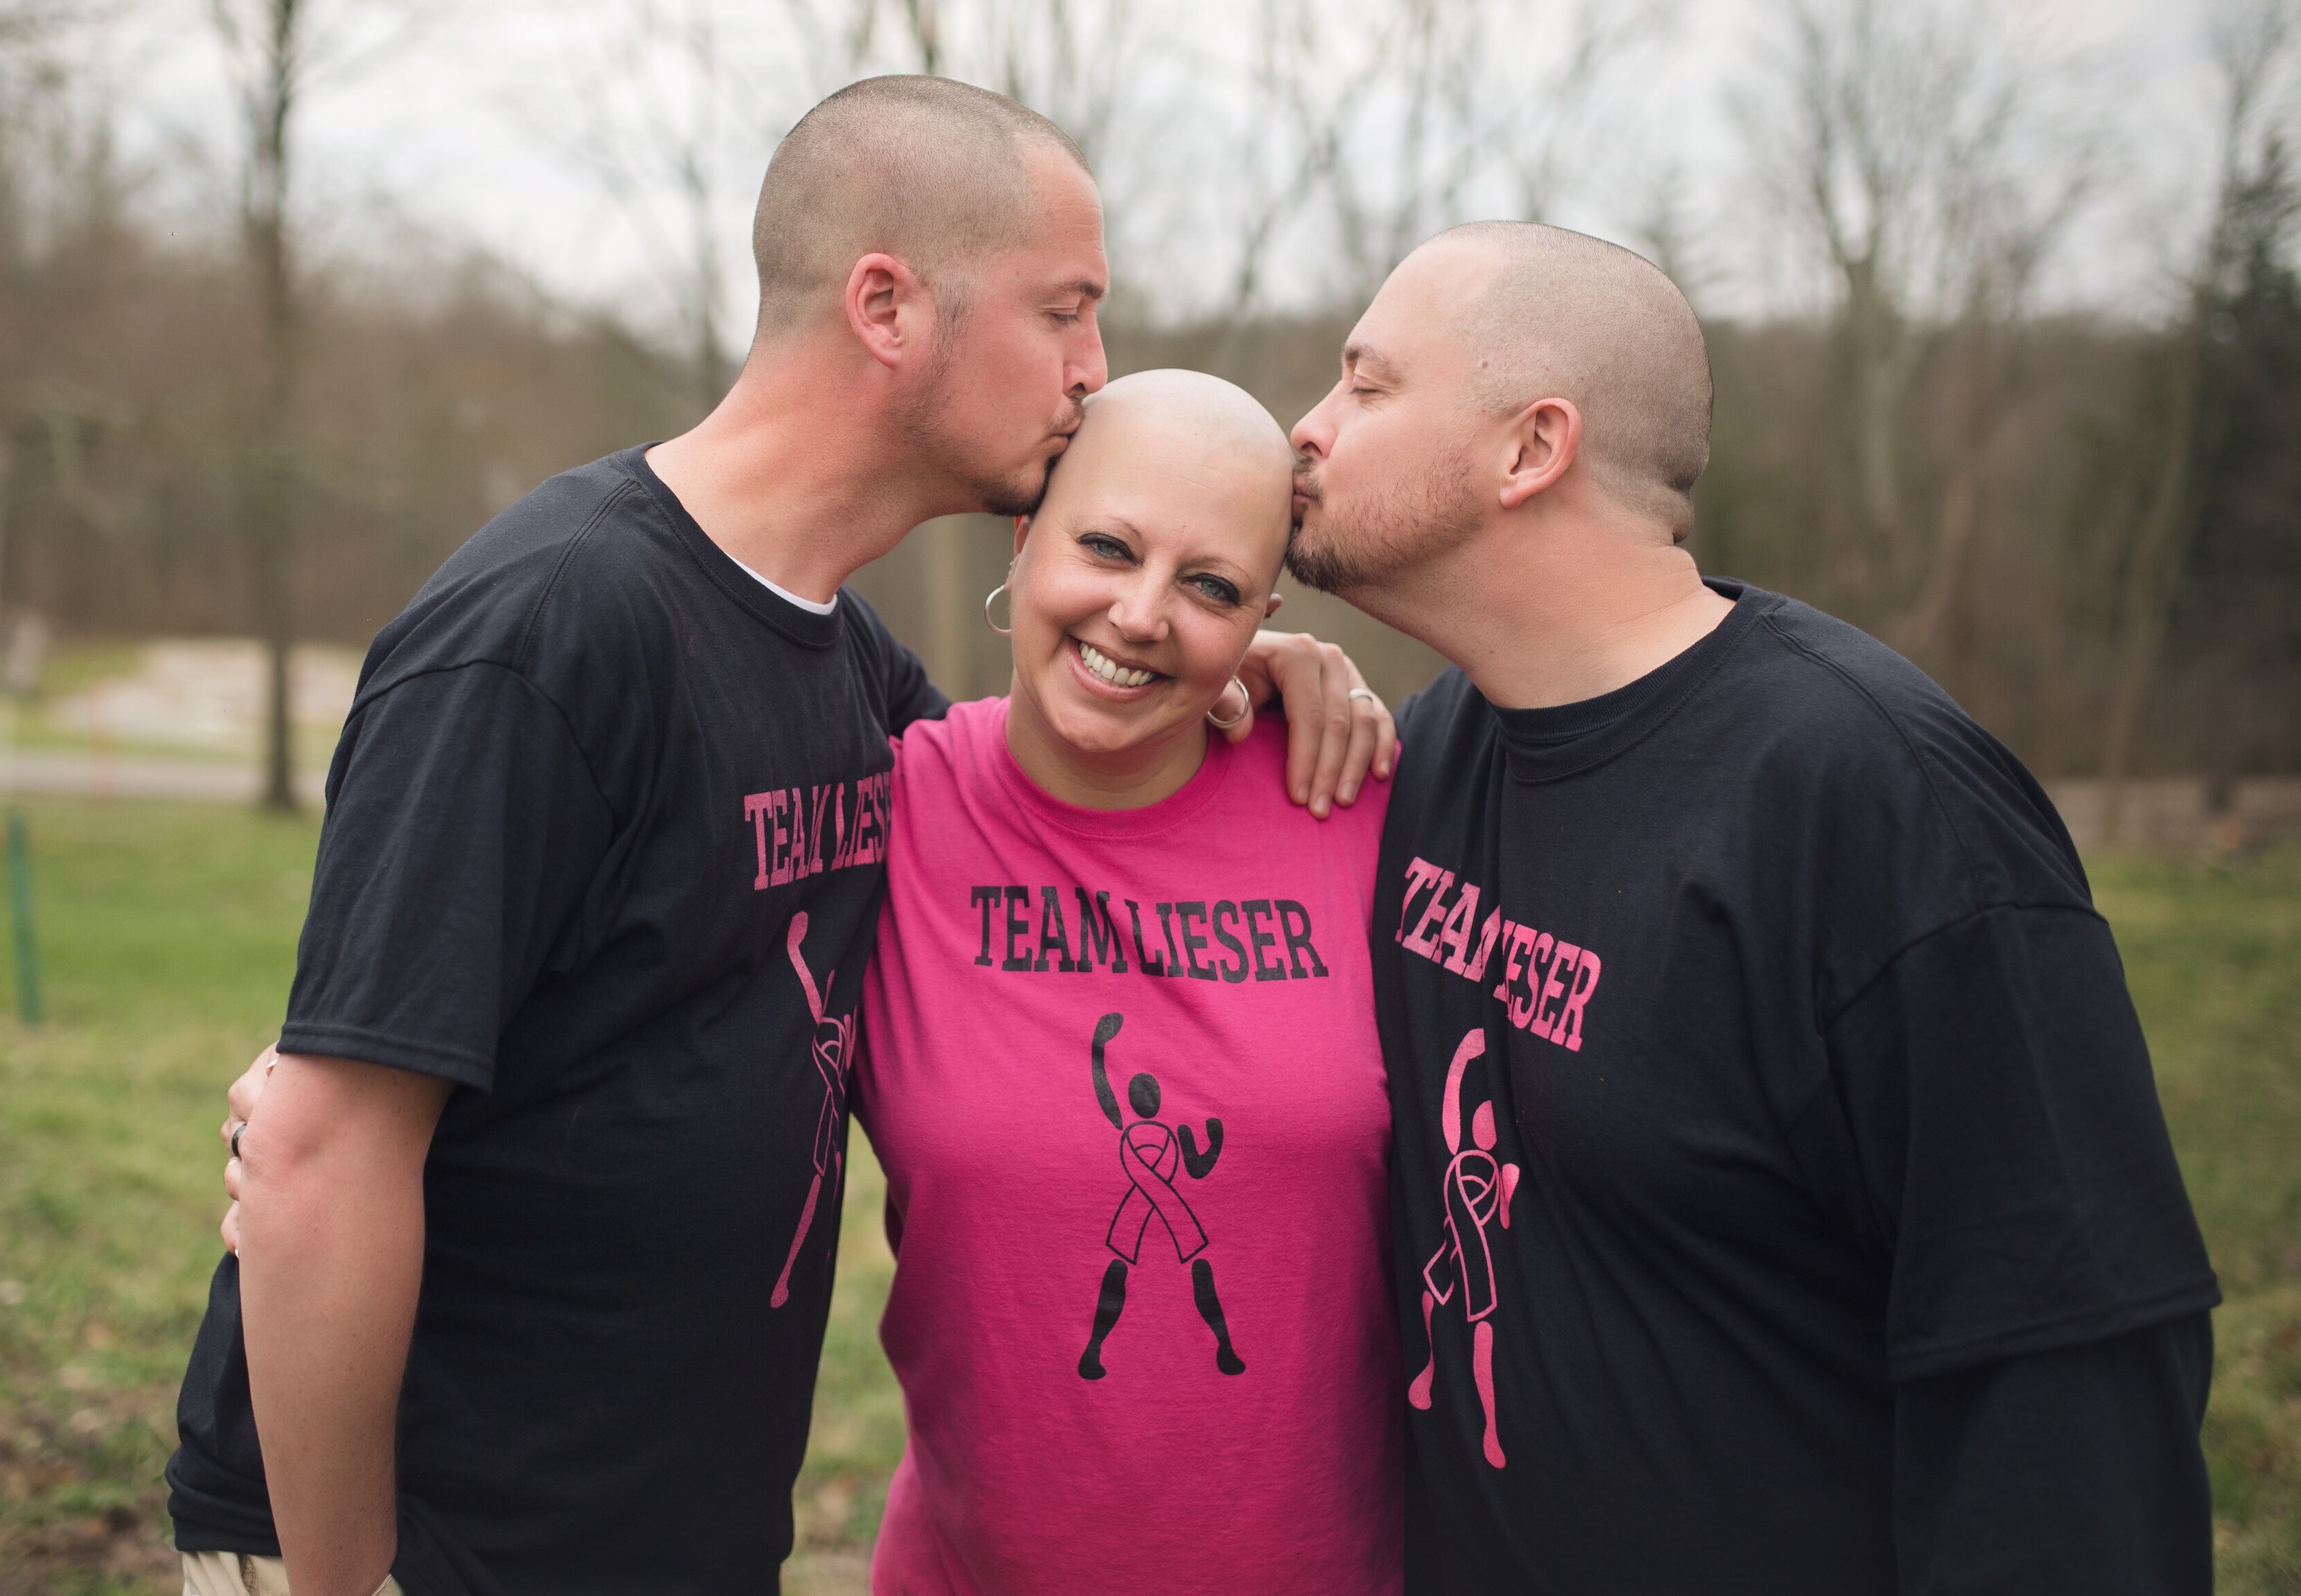 Cancer Patient Getting Love